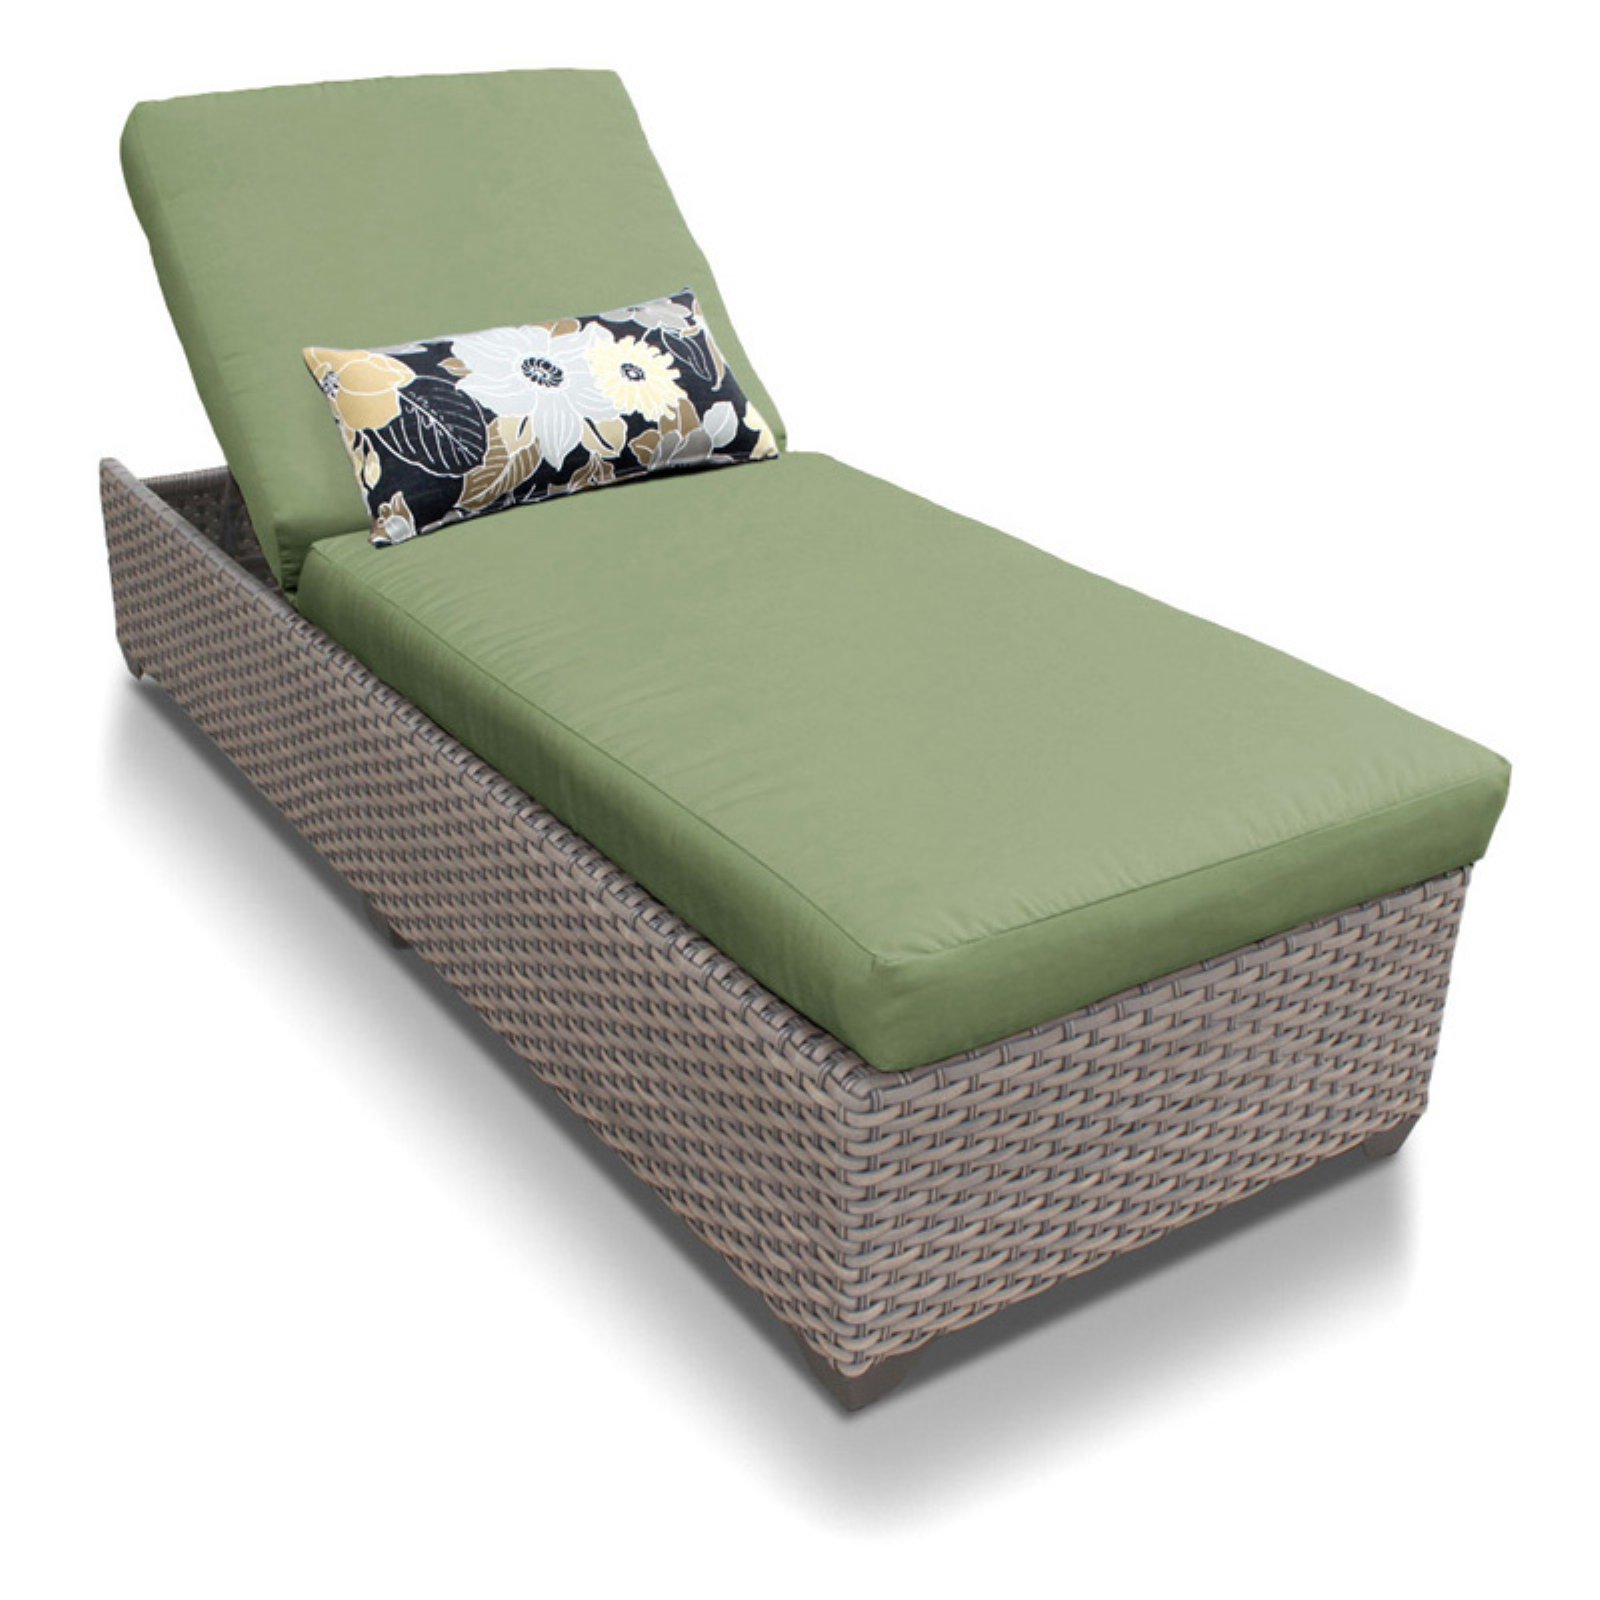 Oasis Chaise Set of 2 Outdoor Wicker Patio Furniture - image 2 of 2